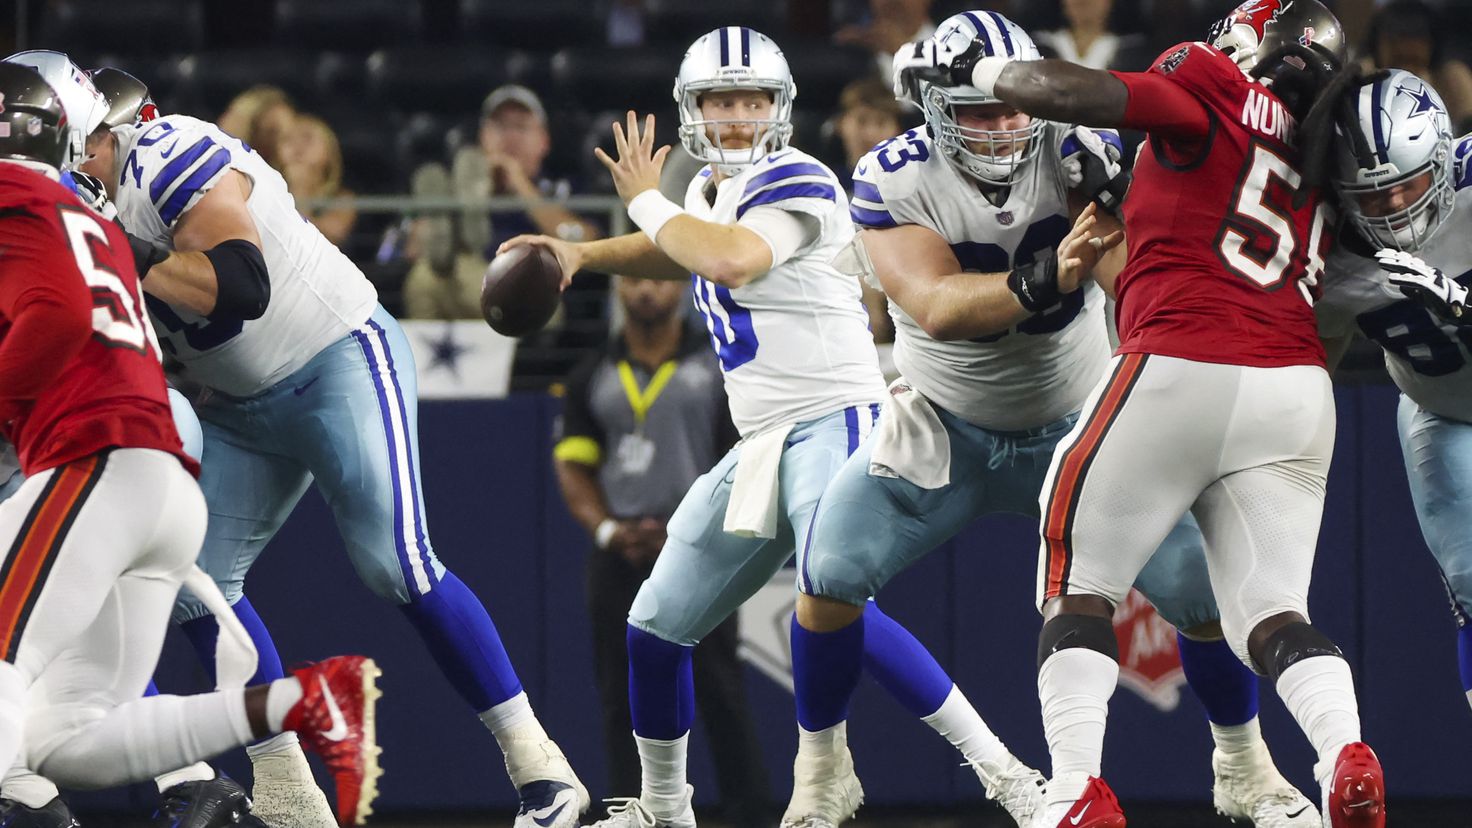 Prescott out 'several weeks' with hand surgery after Cowboys' loss